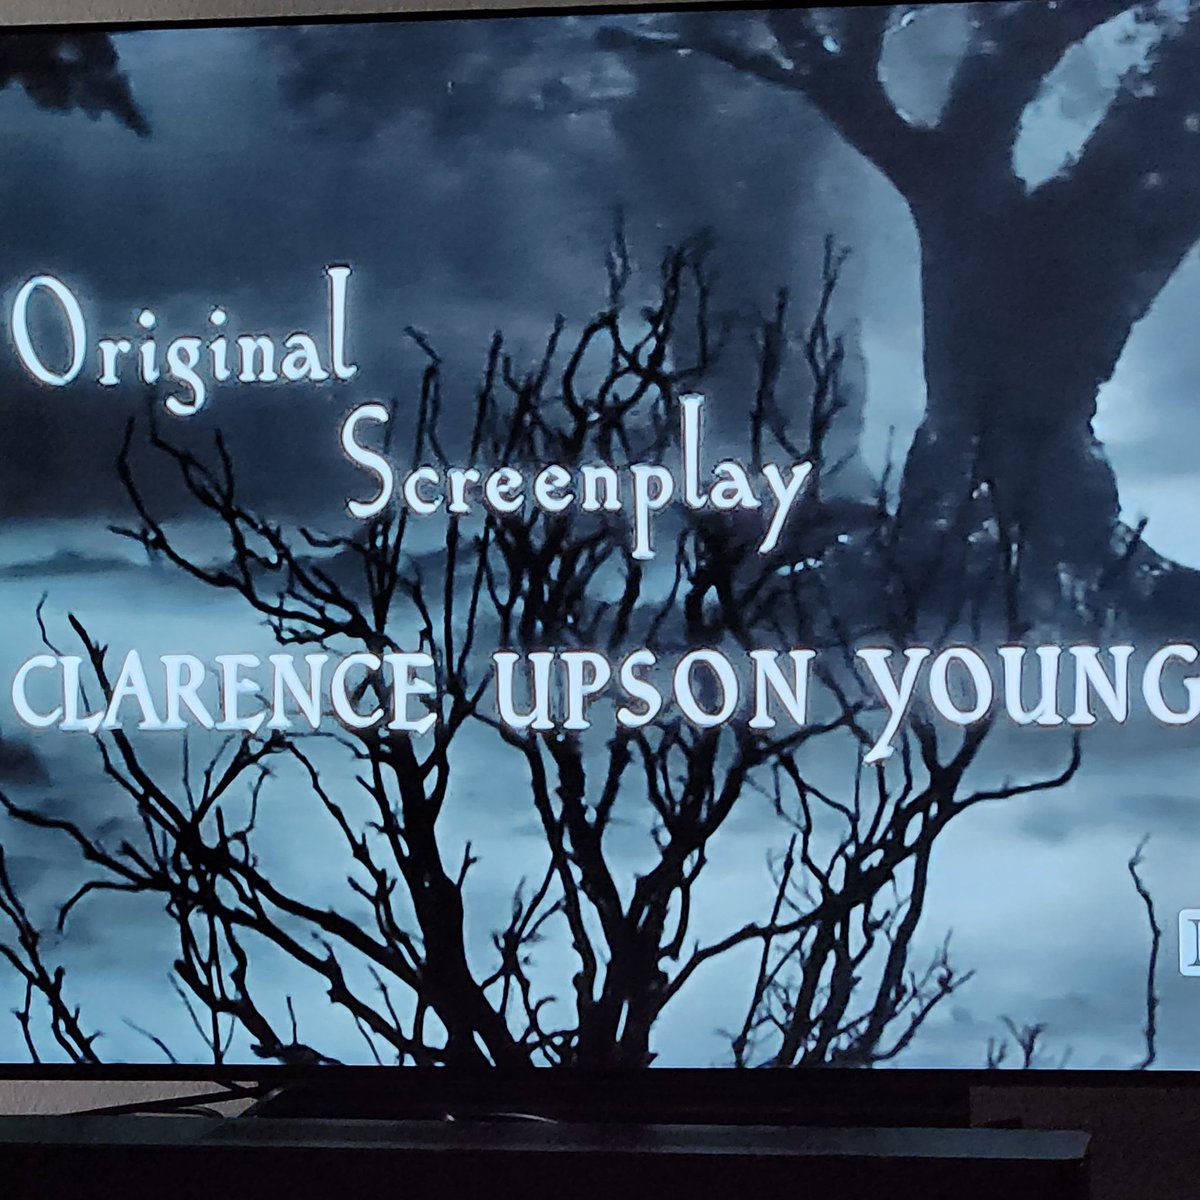 (Snobby MST3K voice) 'Oh, is the great Clarence Upson Young going to honor us with his screenplay?'
#Svengoolie